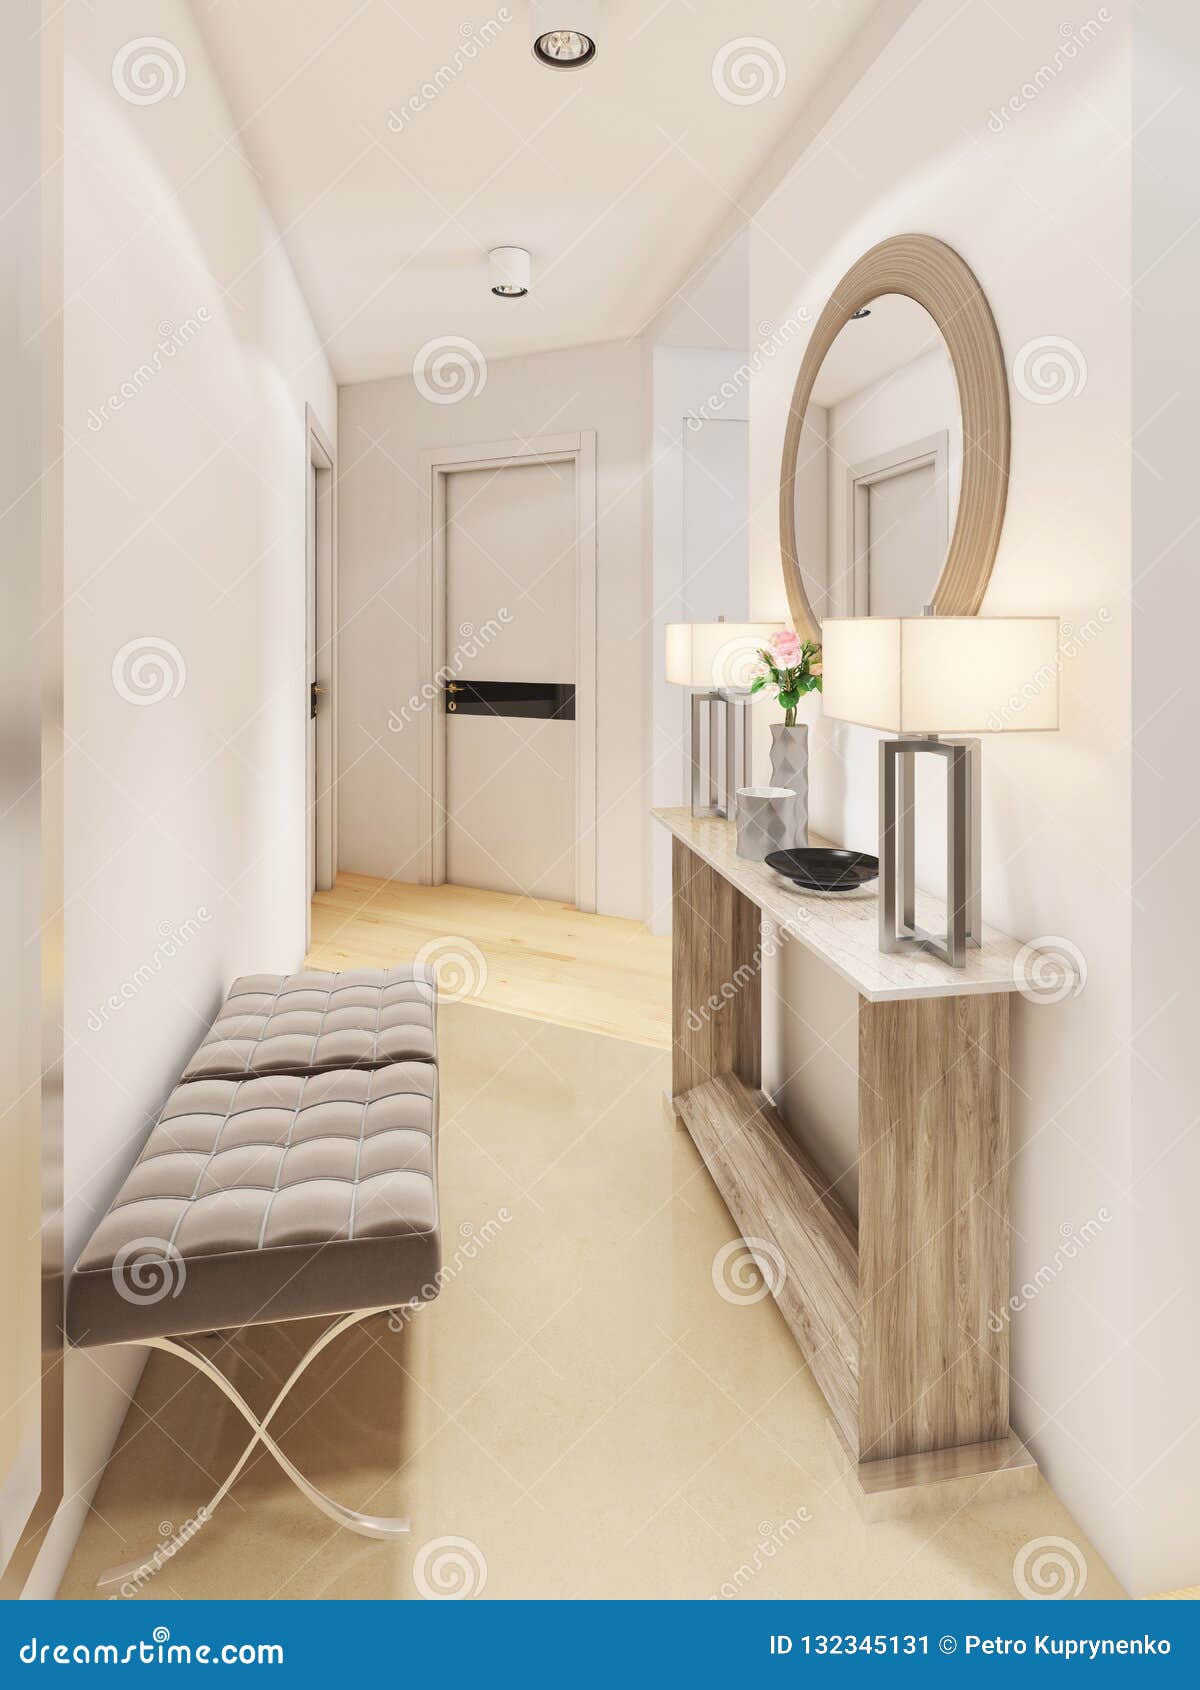 Luxurious Entrance Hall In A Modern Style With A Table For Keys